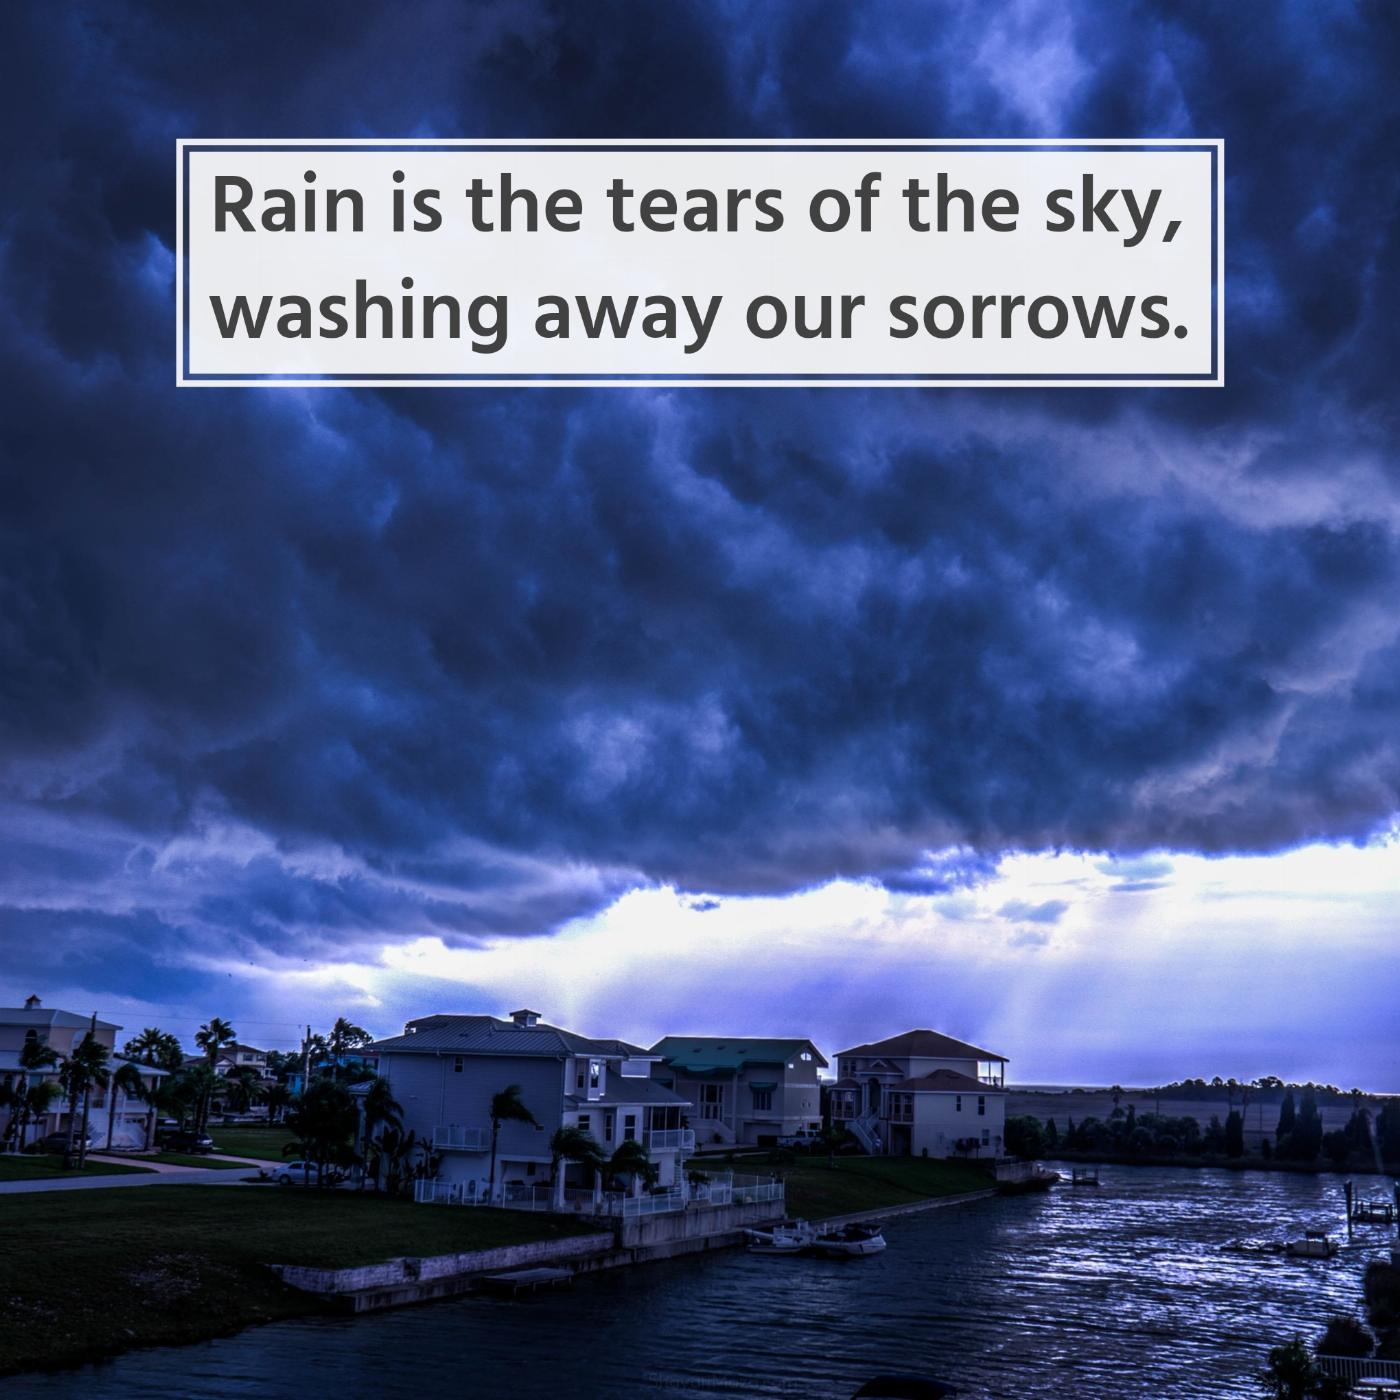 Rain is the tears of the sky washing away our sorrows